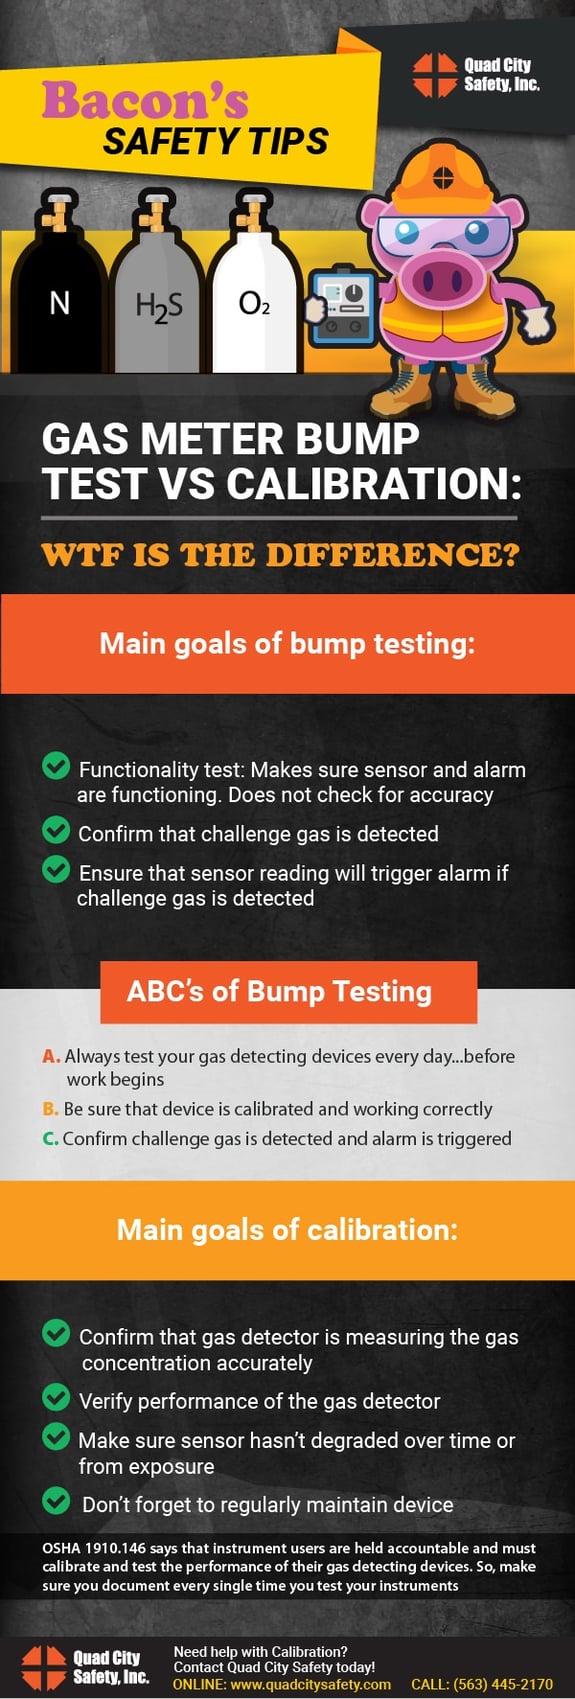 Bacon’s Safety Tips Gas Meter Bump Test vs Calibration. WTF is the difference?